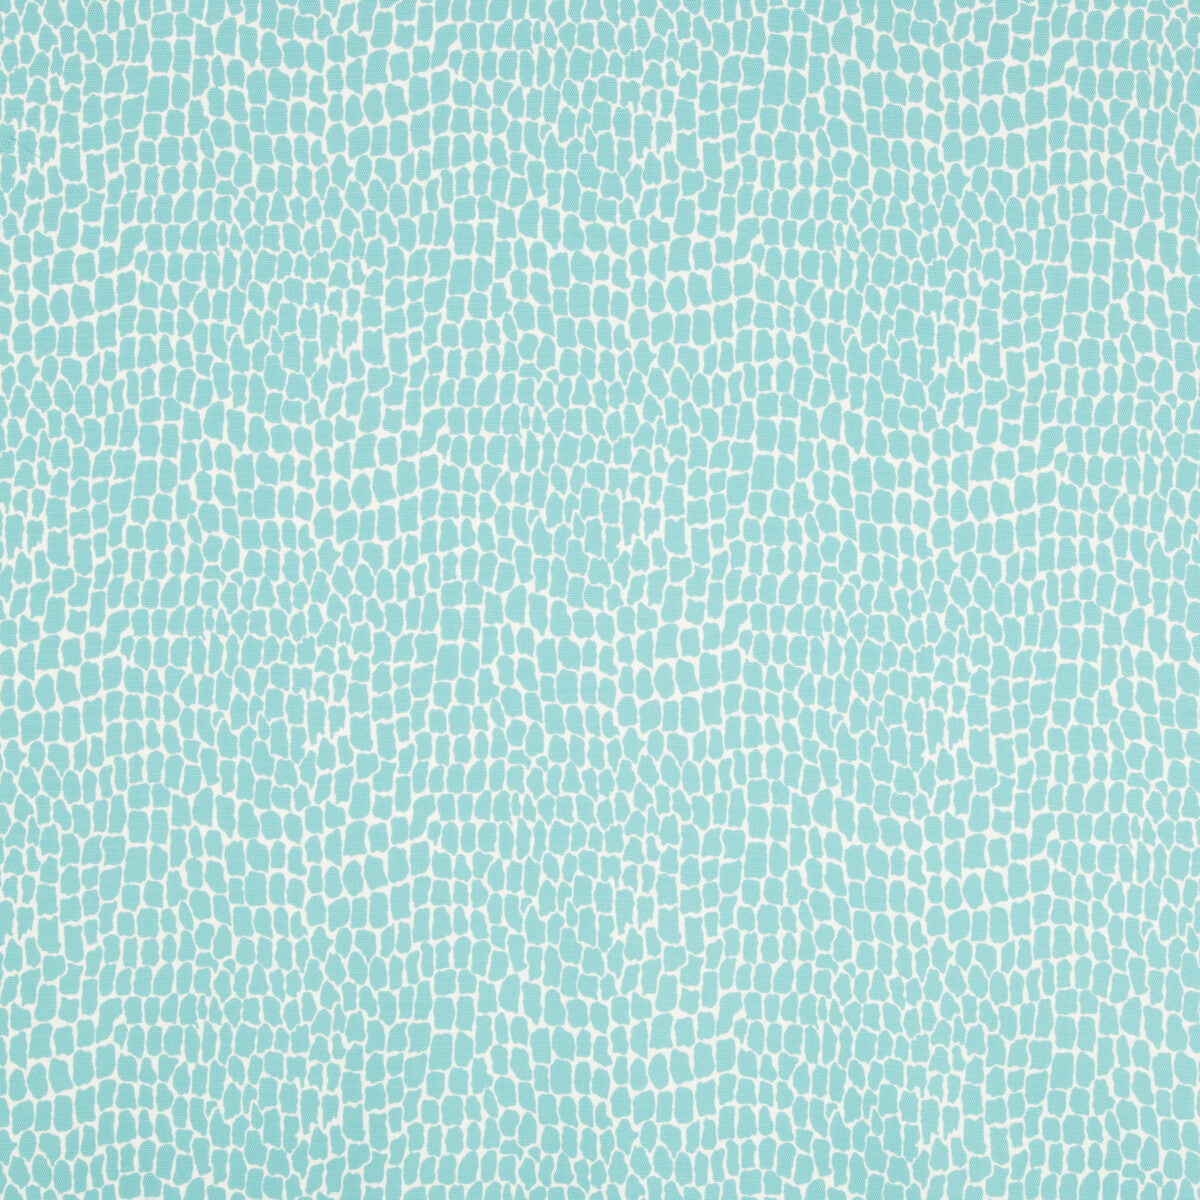 Nile Print fabric in aqua color - pattern 8017154.13.0 - by Brunschwig &amp; Fils in the En Vacances collection